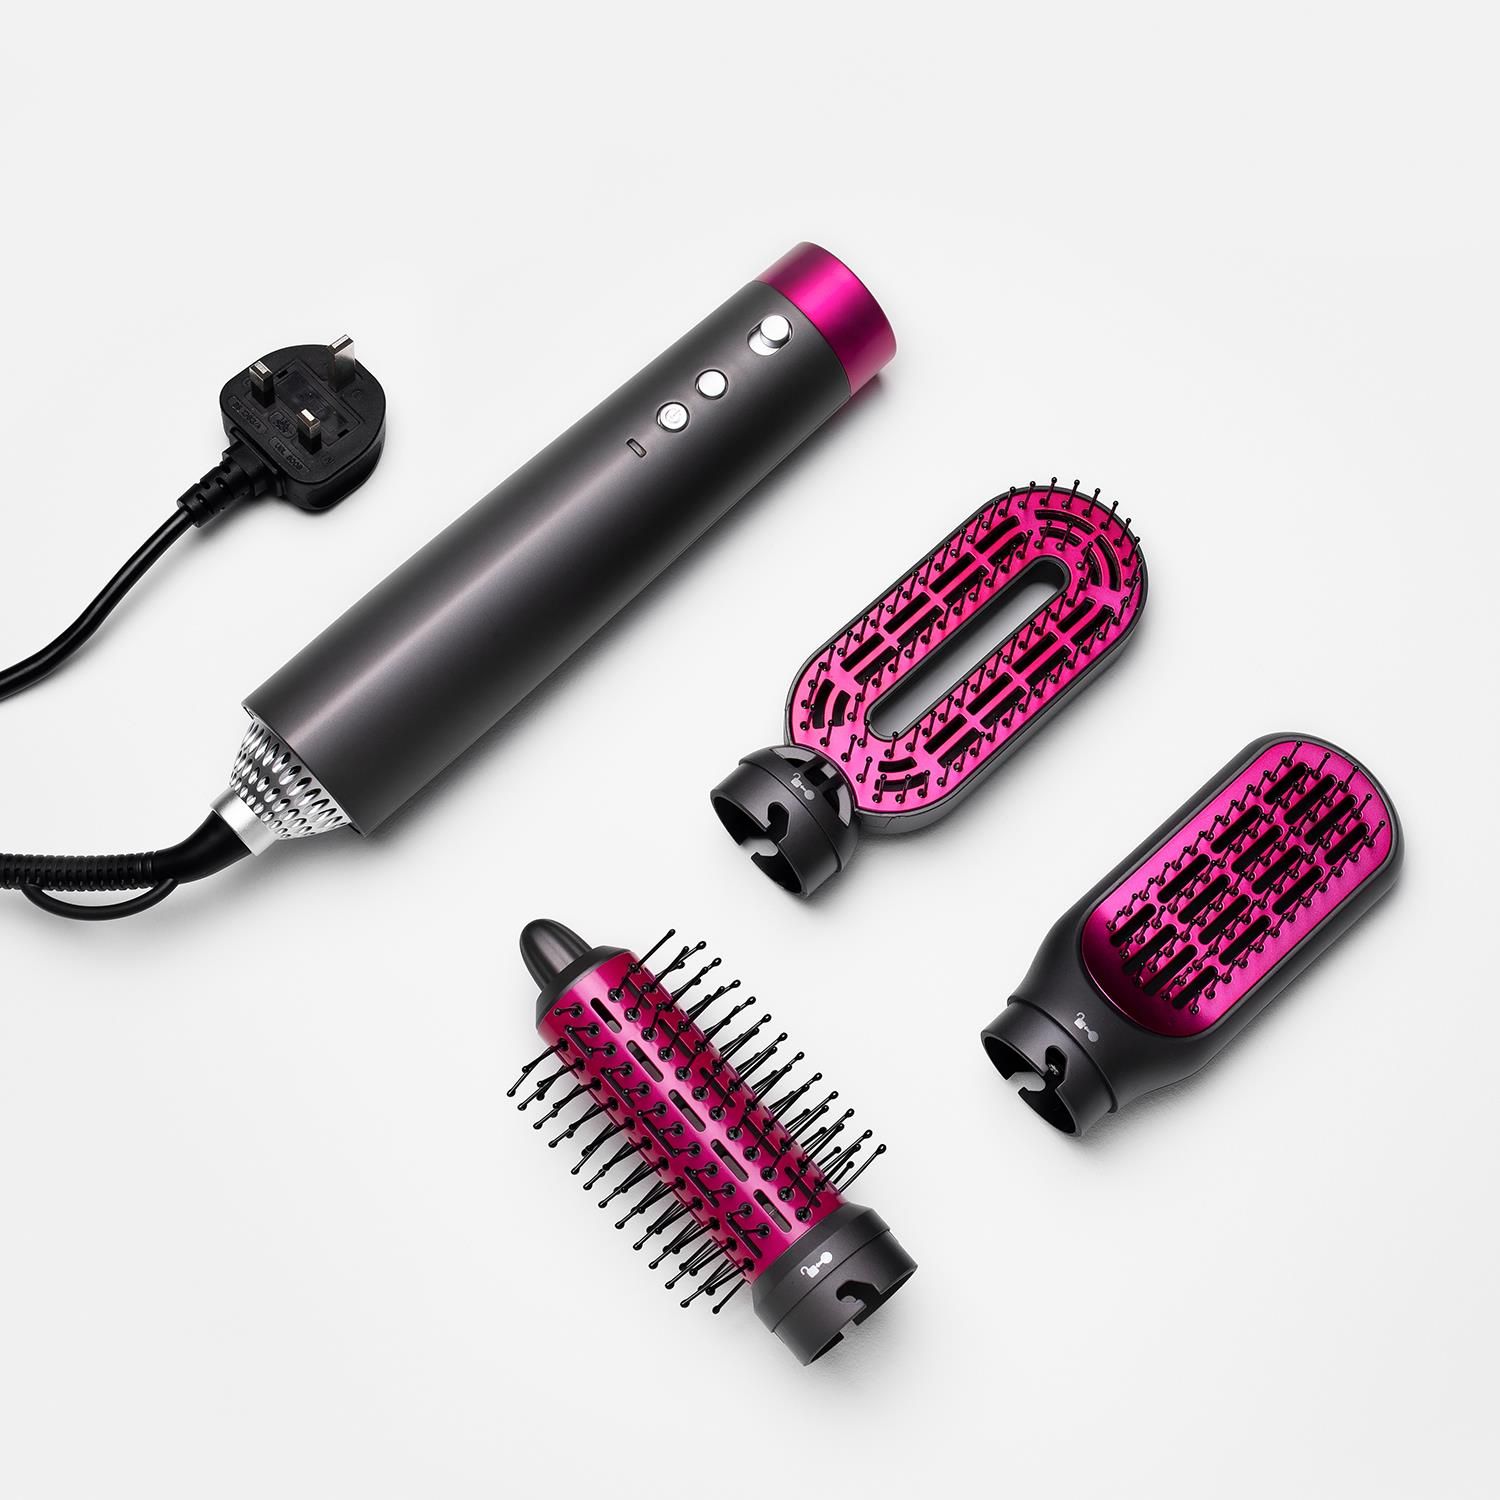 All of your hairstyling needs in one tool with the envie 3 in 1 Hair Styling Brush!  With three interchangeable combs, including a 12cm styling brush for curling, 14cm brush head for straightening and a 15cm brush for blow-drying – enjoy a variety of looks from one tool.

Key Features: 
3 interchangeable combs
Hair curling, straightening and drying
One button temperature control
3 heat settings – hot/warm/cool
2 speed settings – high/low
Led light indicator for temperature settings
Max. power: 900 watts